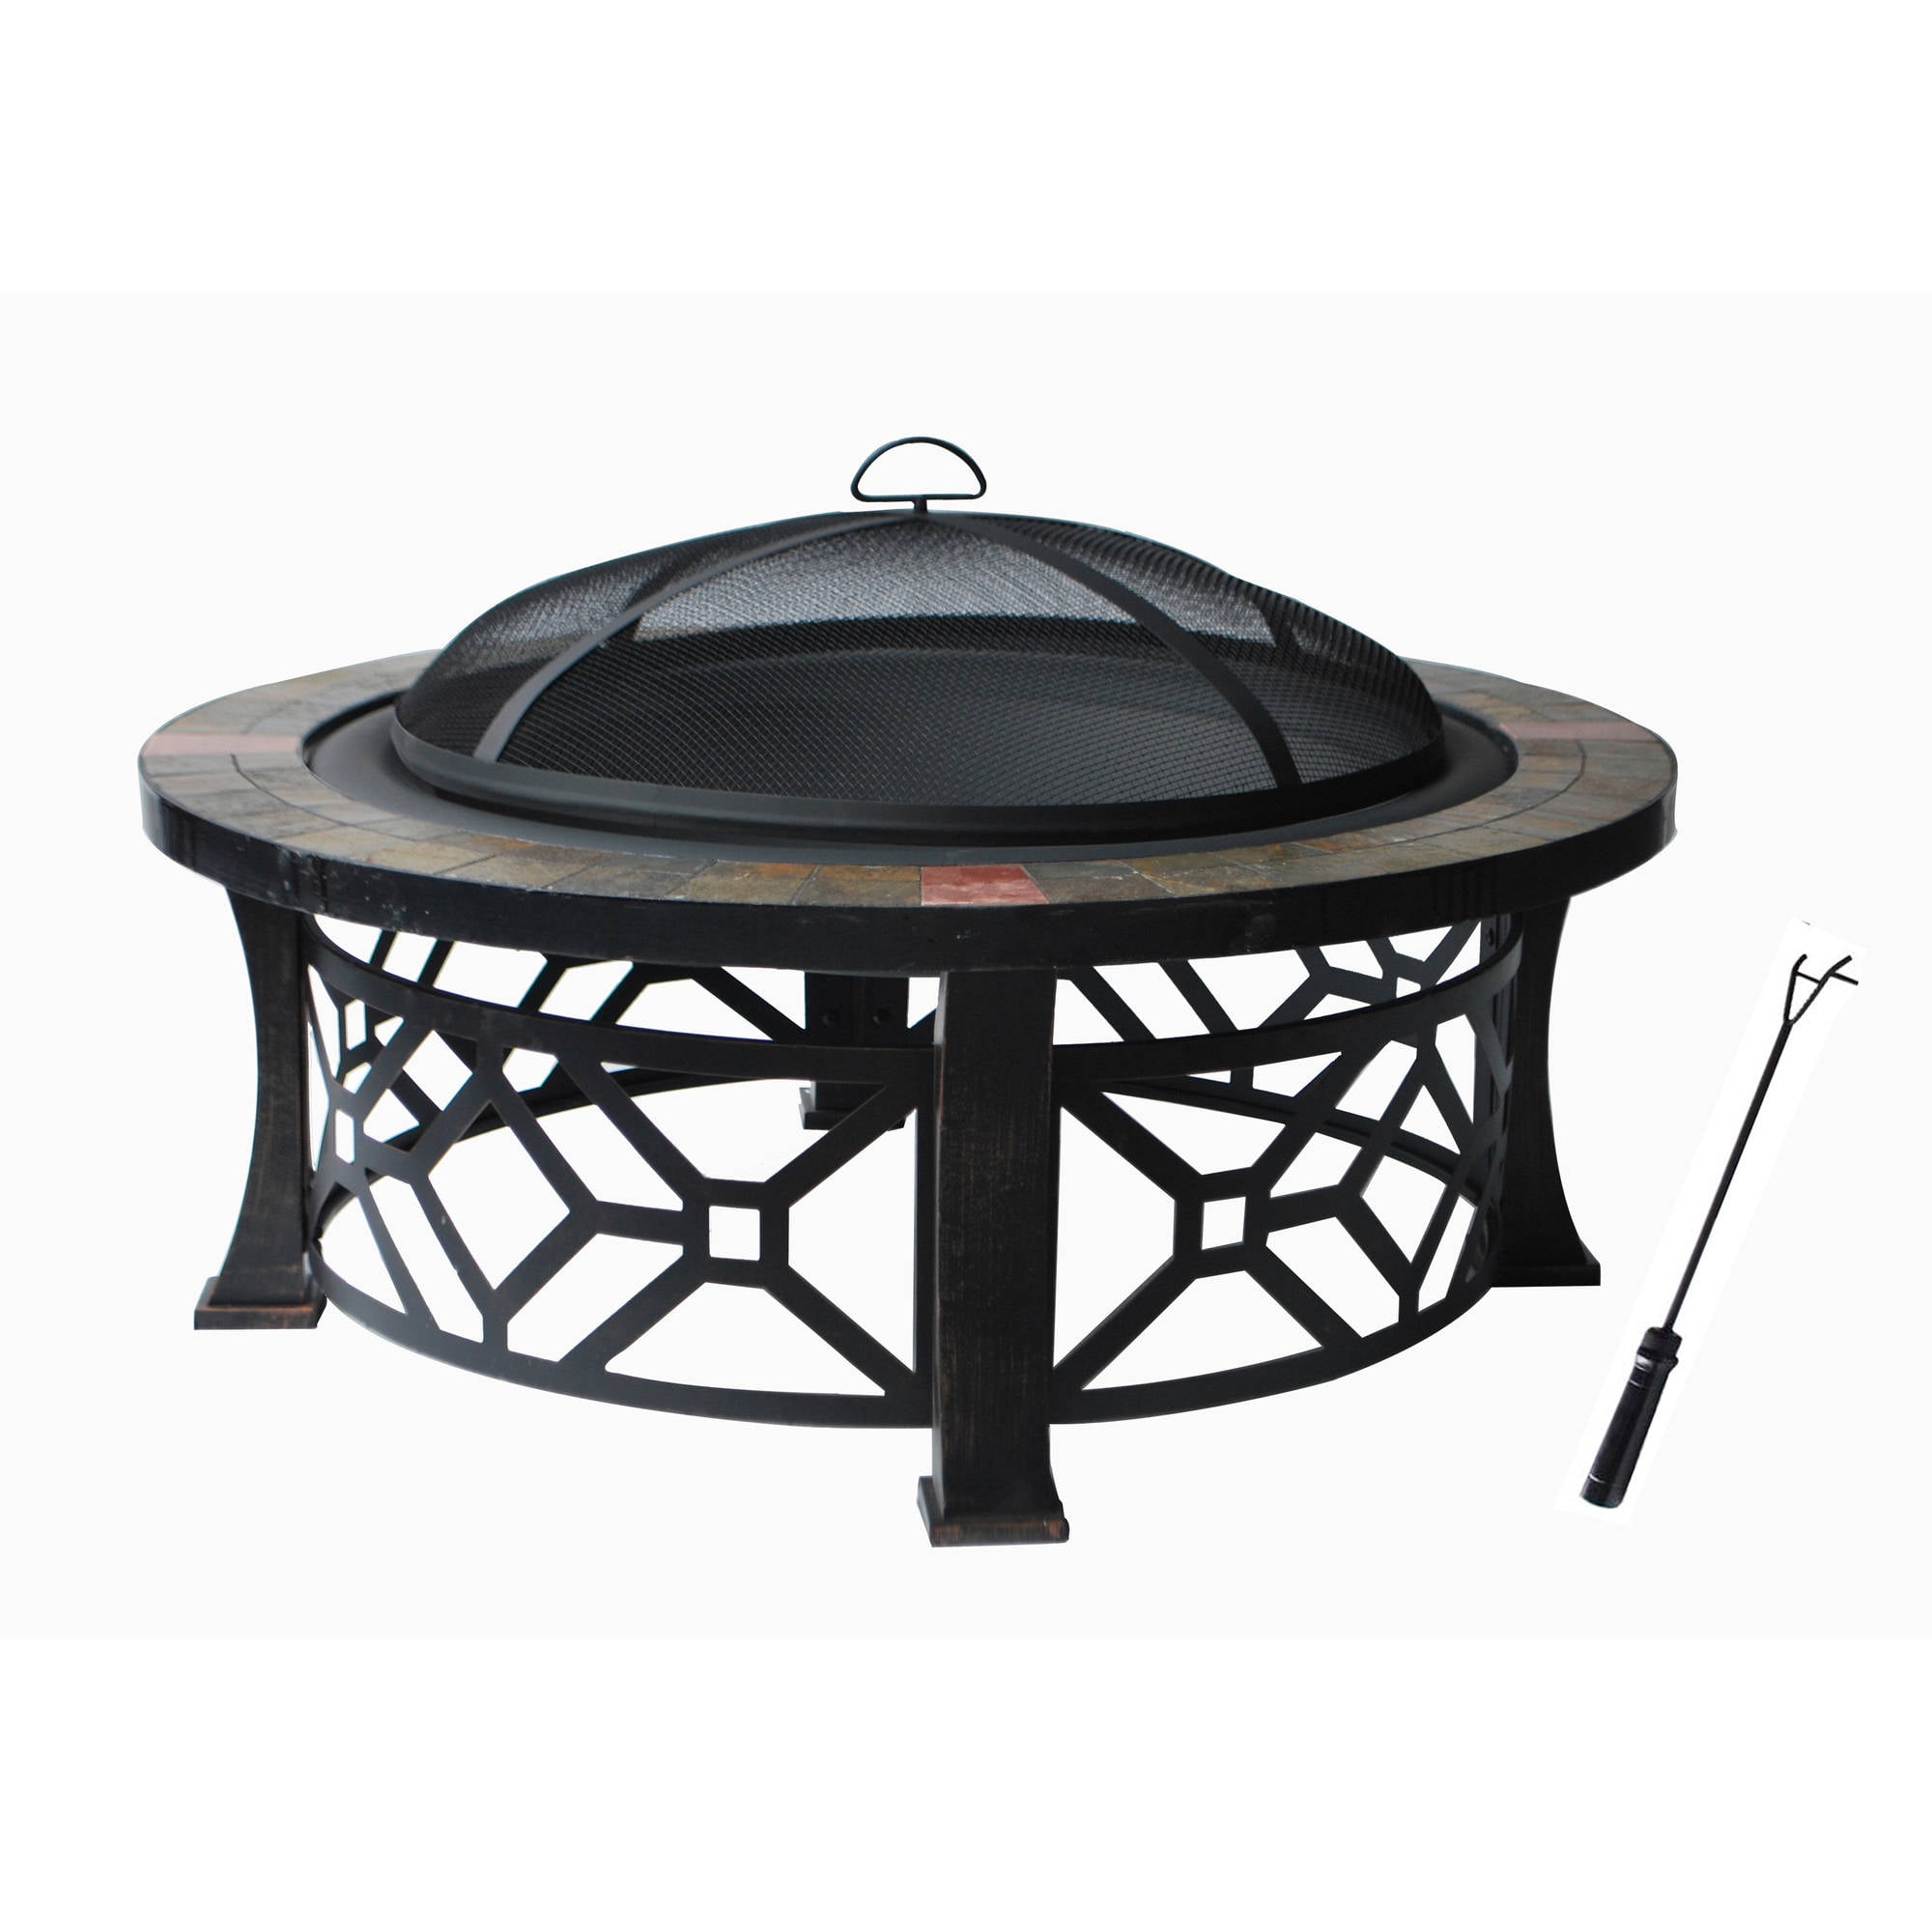 Fire Pit With Pvc Cover Black, Outdoor Fire Pit Academy